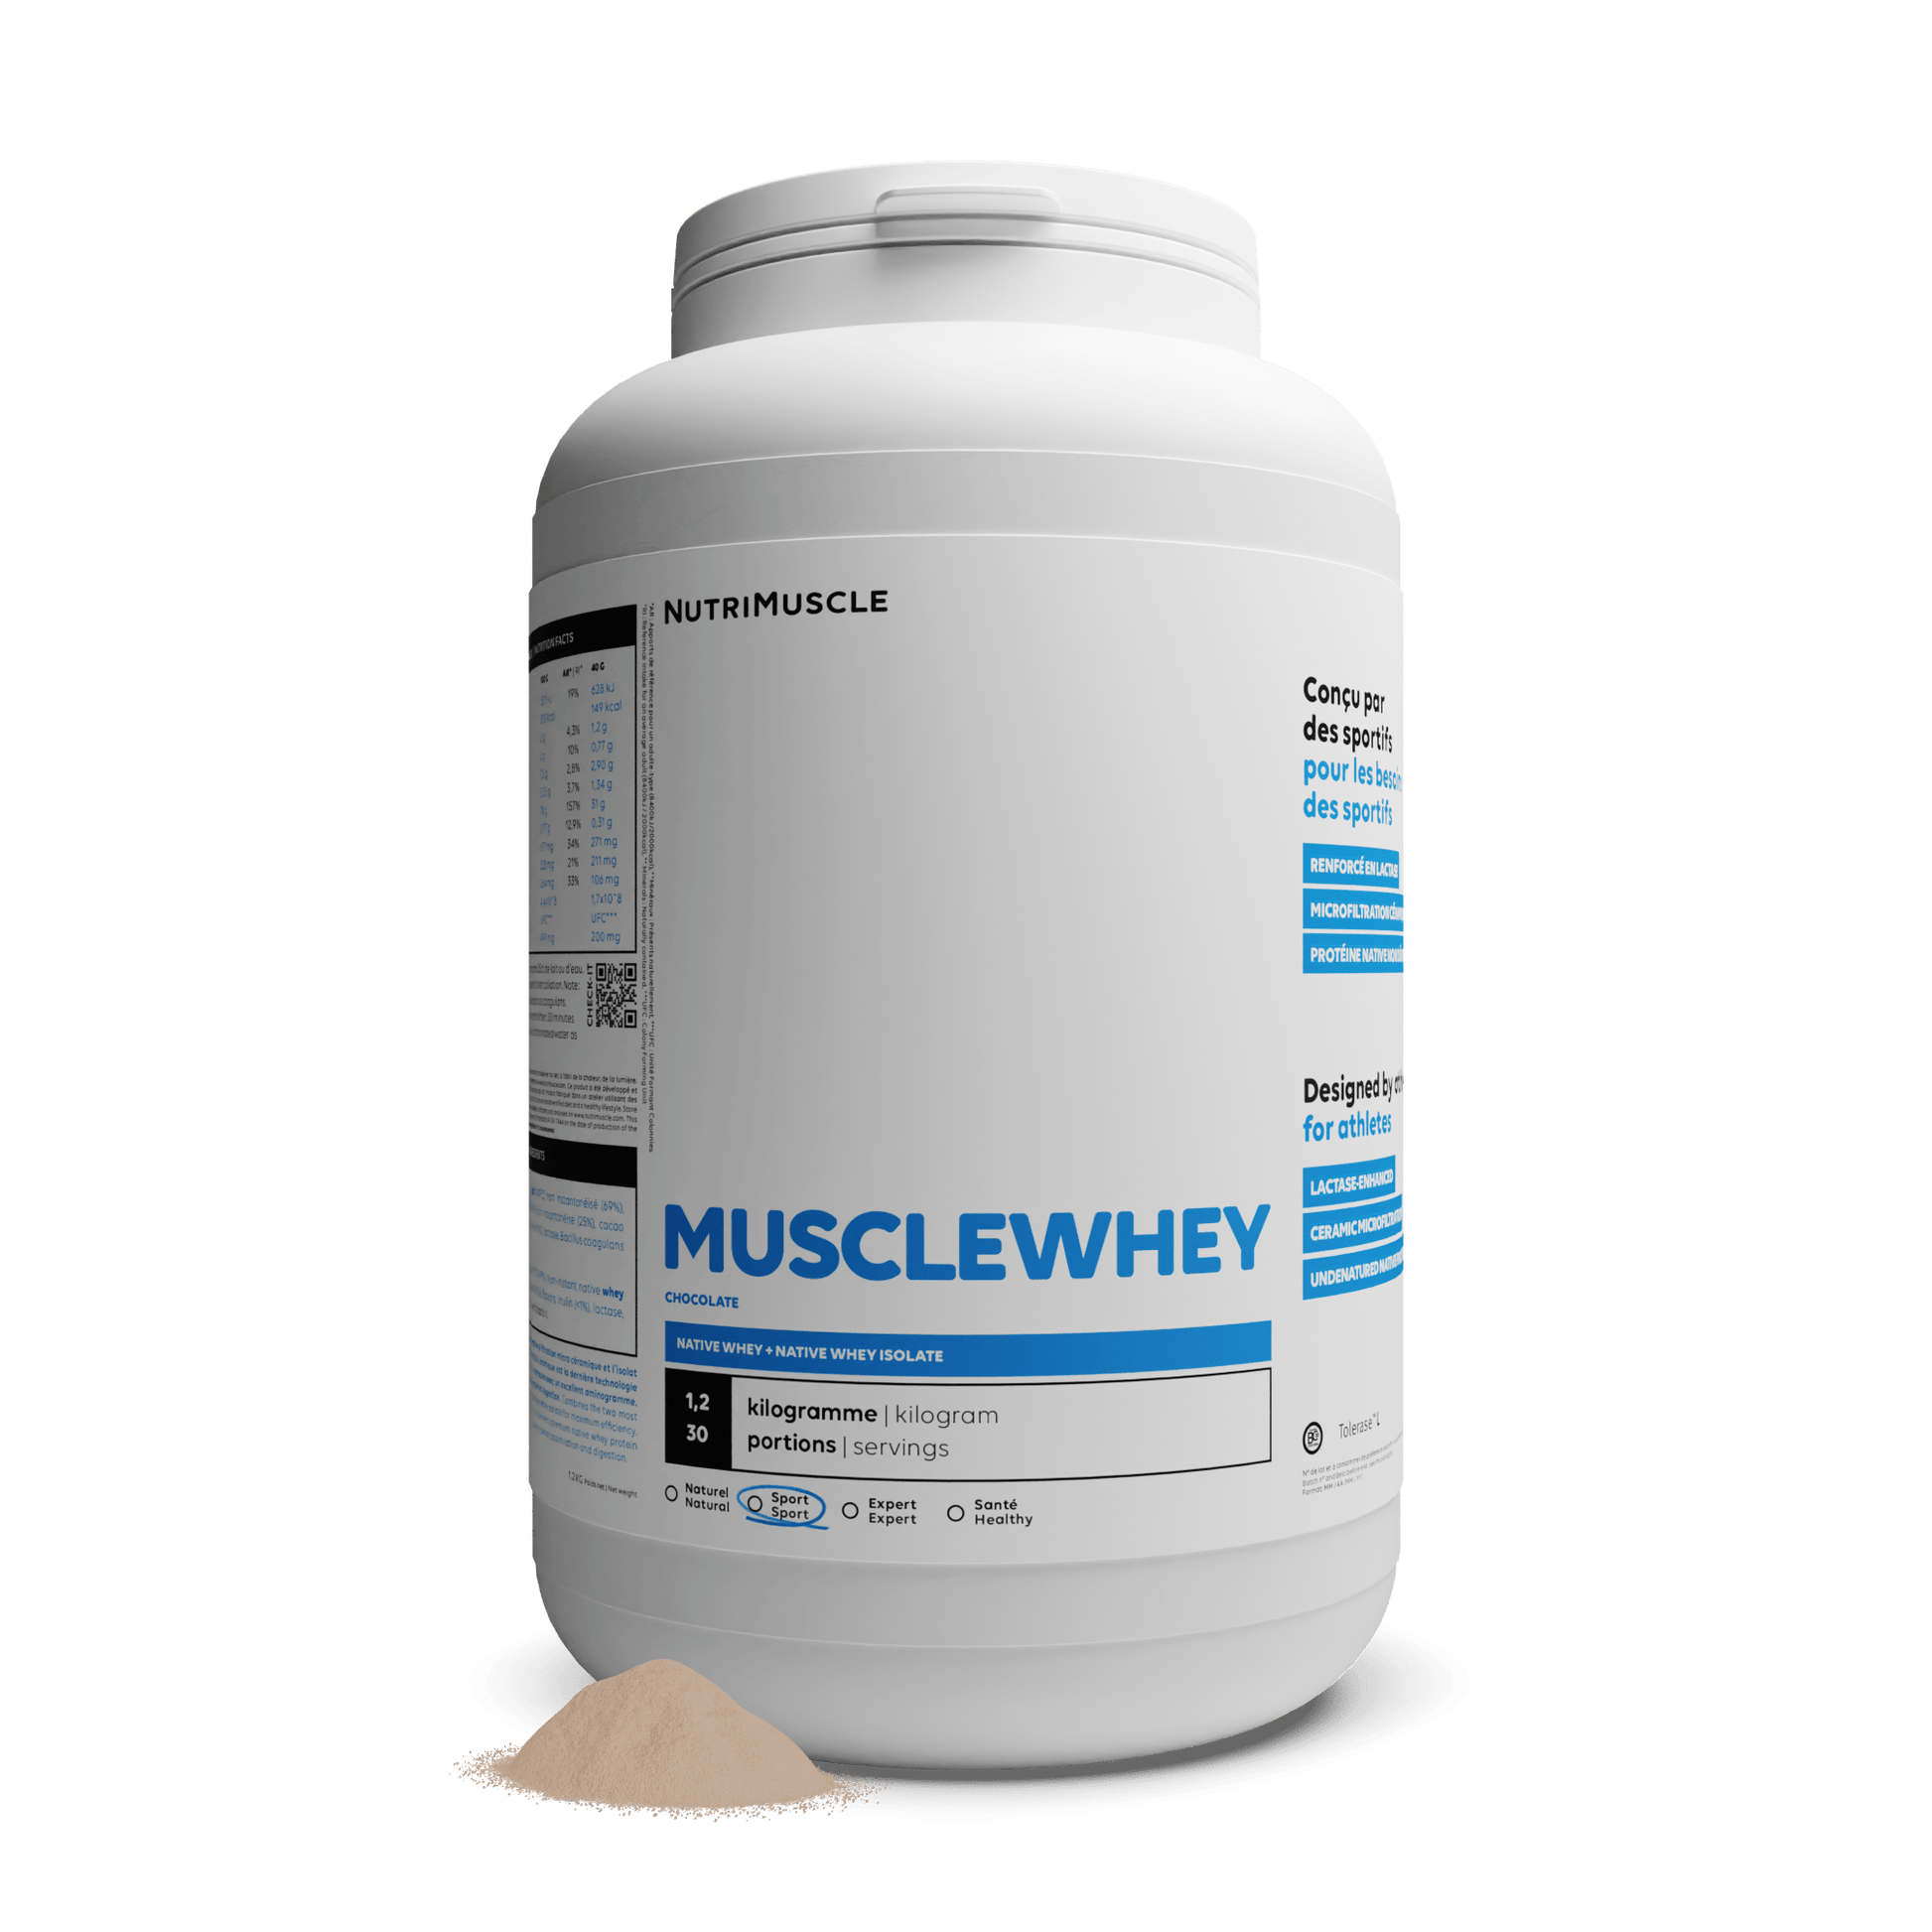 Nutrimuscle Protéines Chocolat / 1.20 kg Musclewhey - Mix Protein